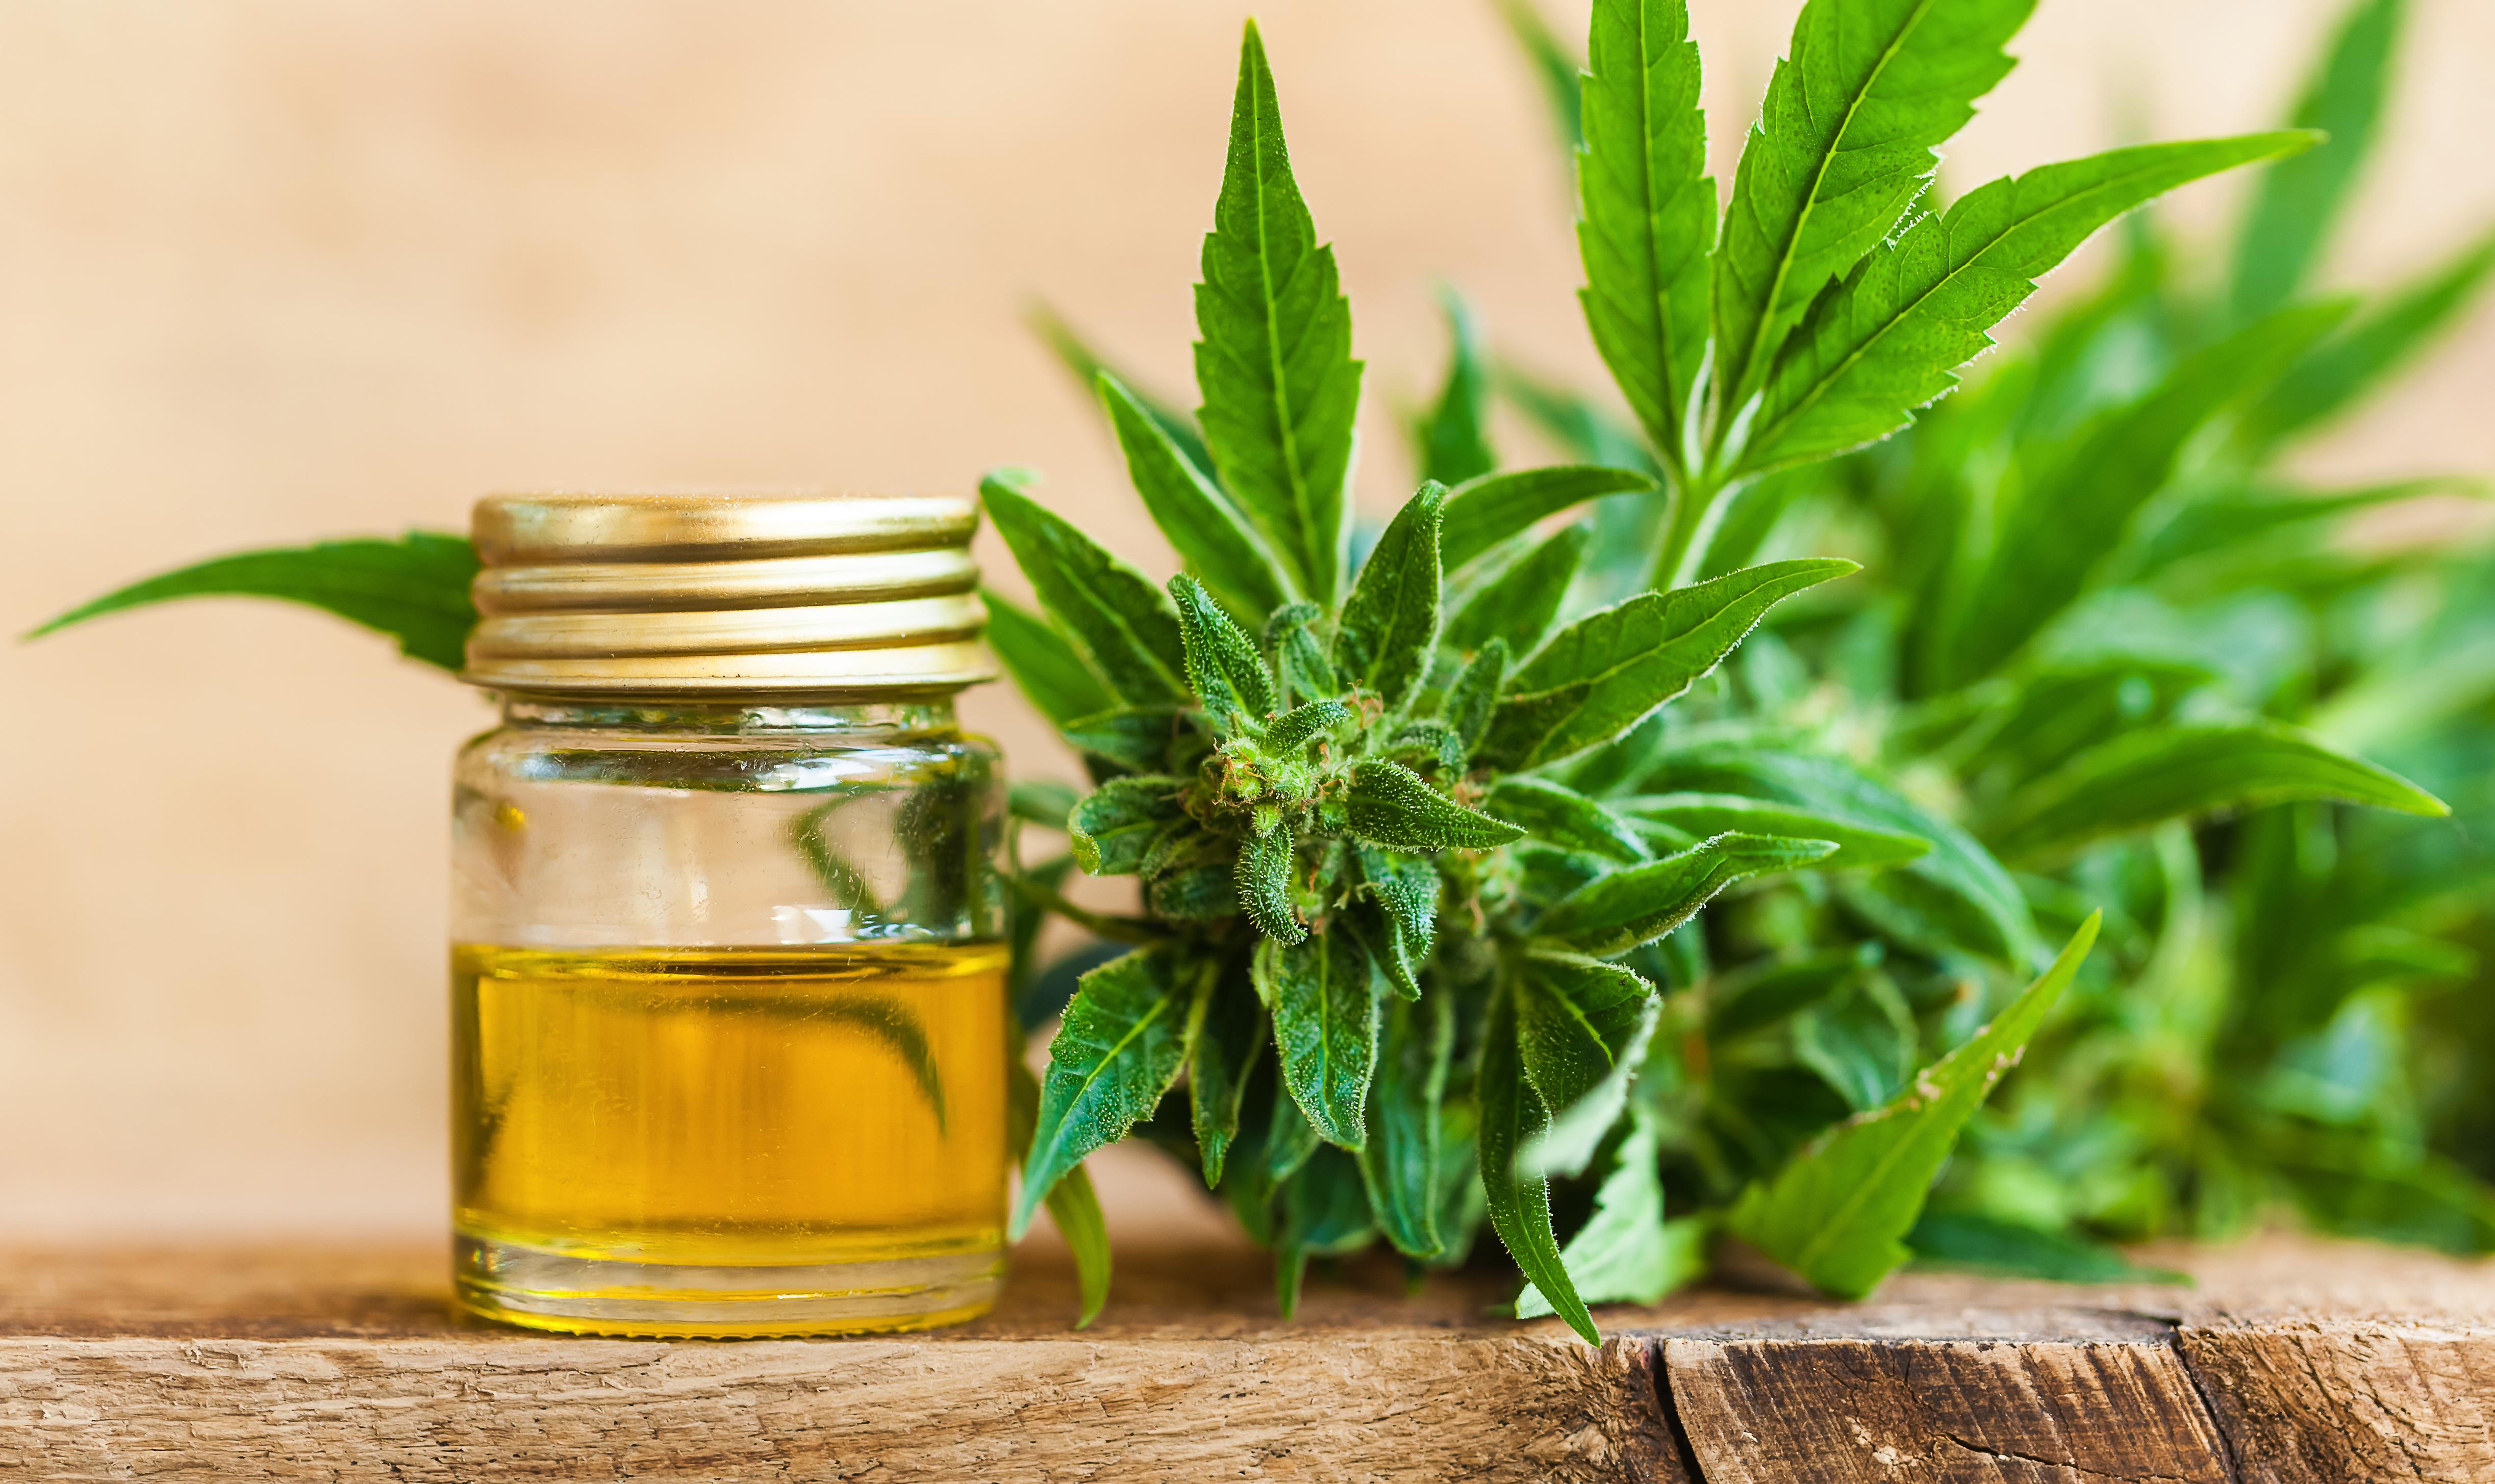 7Things You Have To Know About CBD